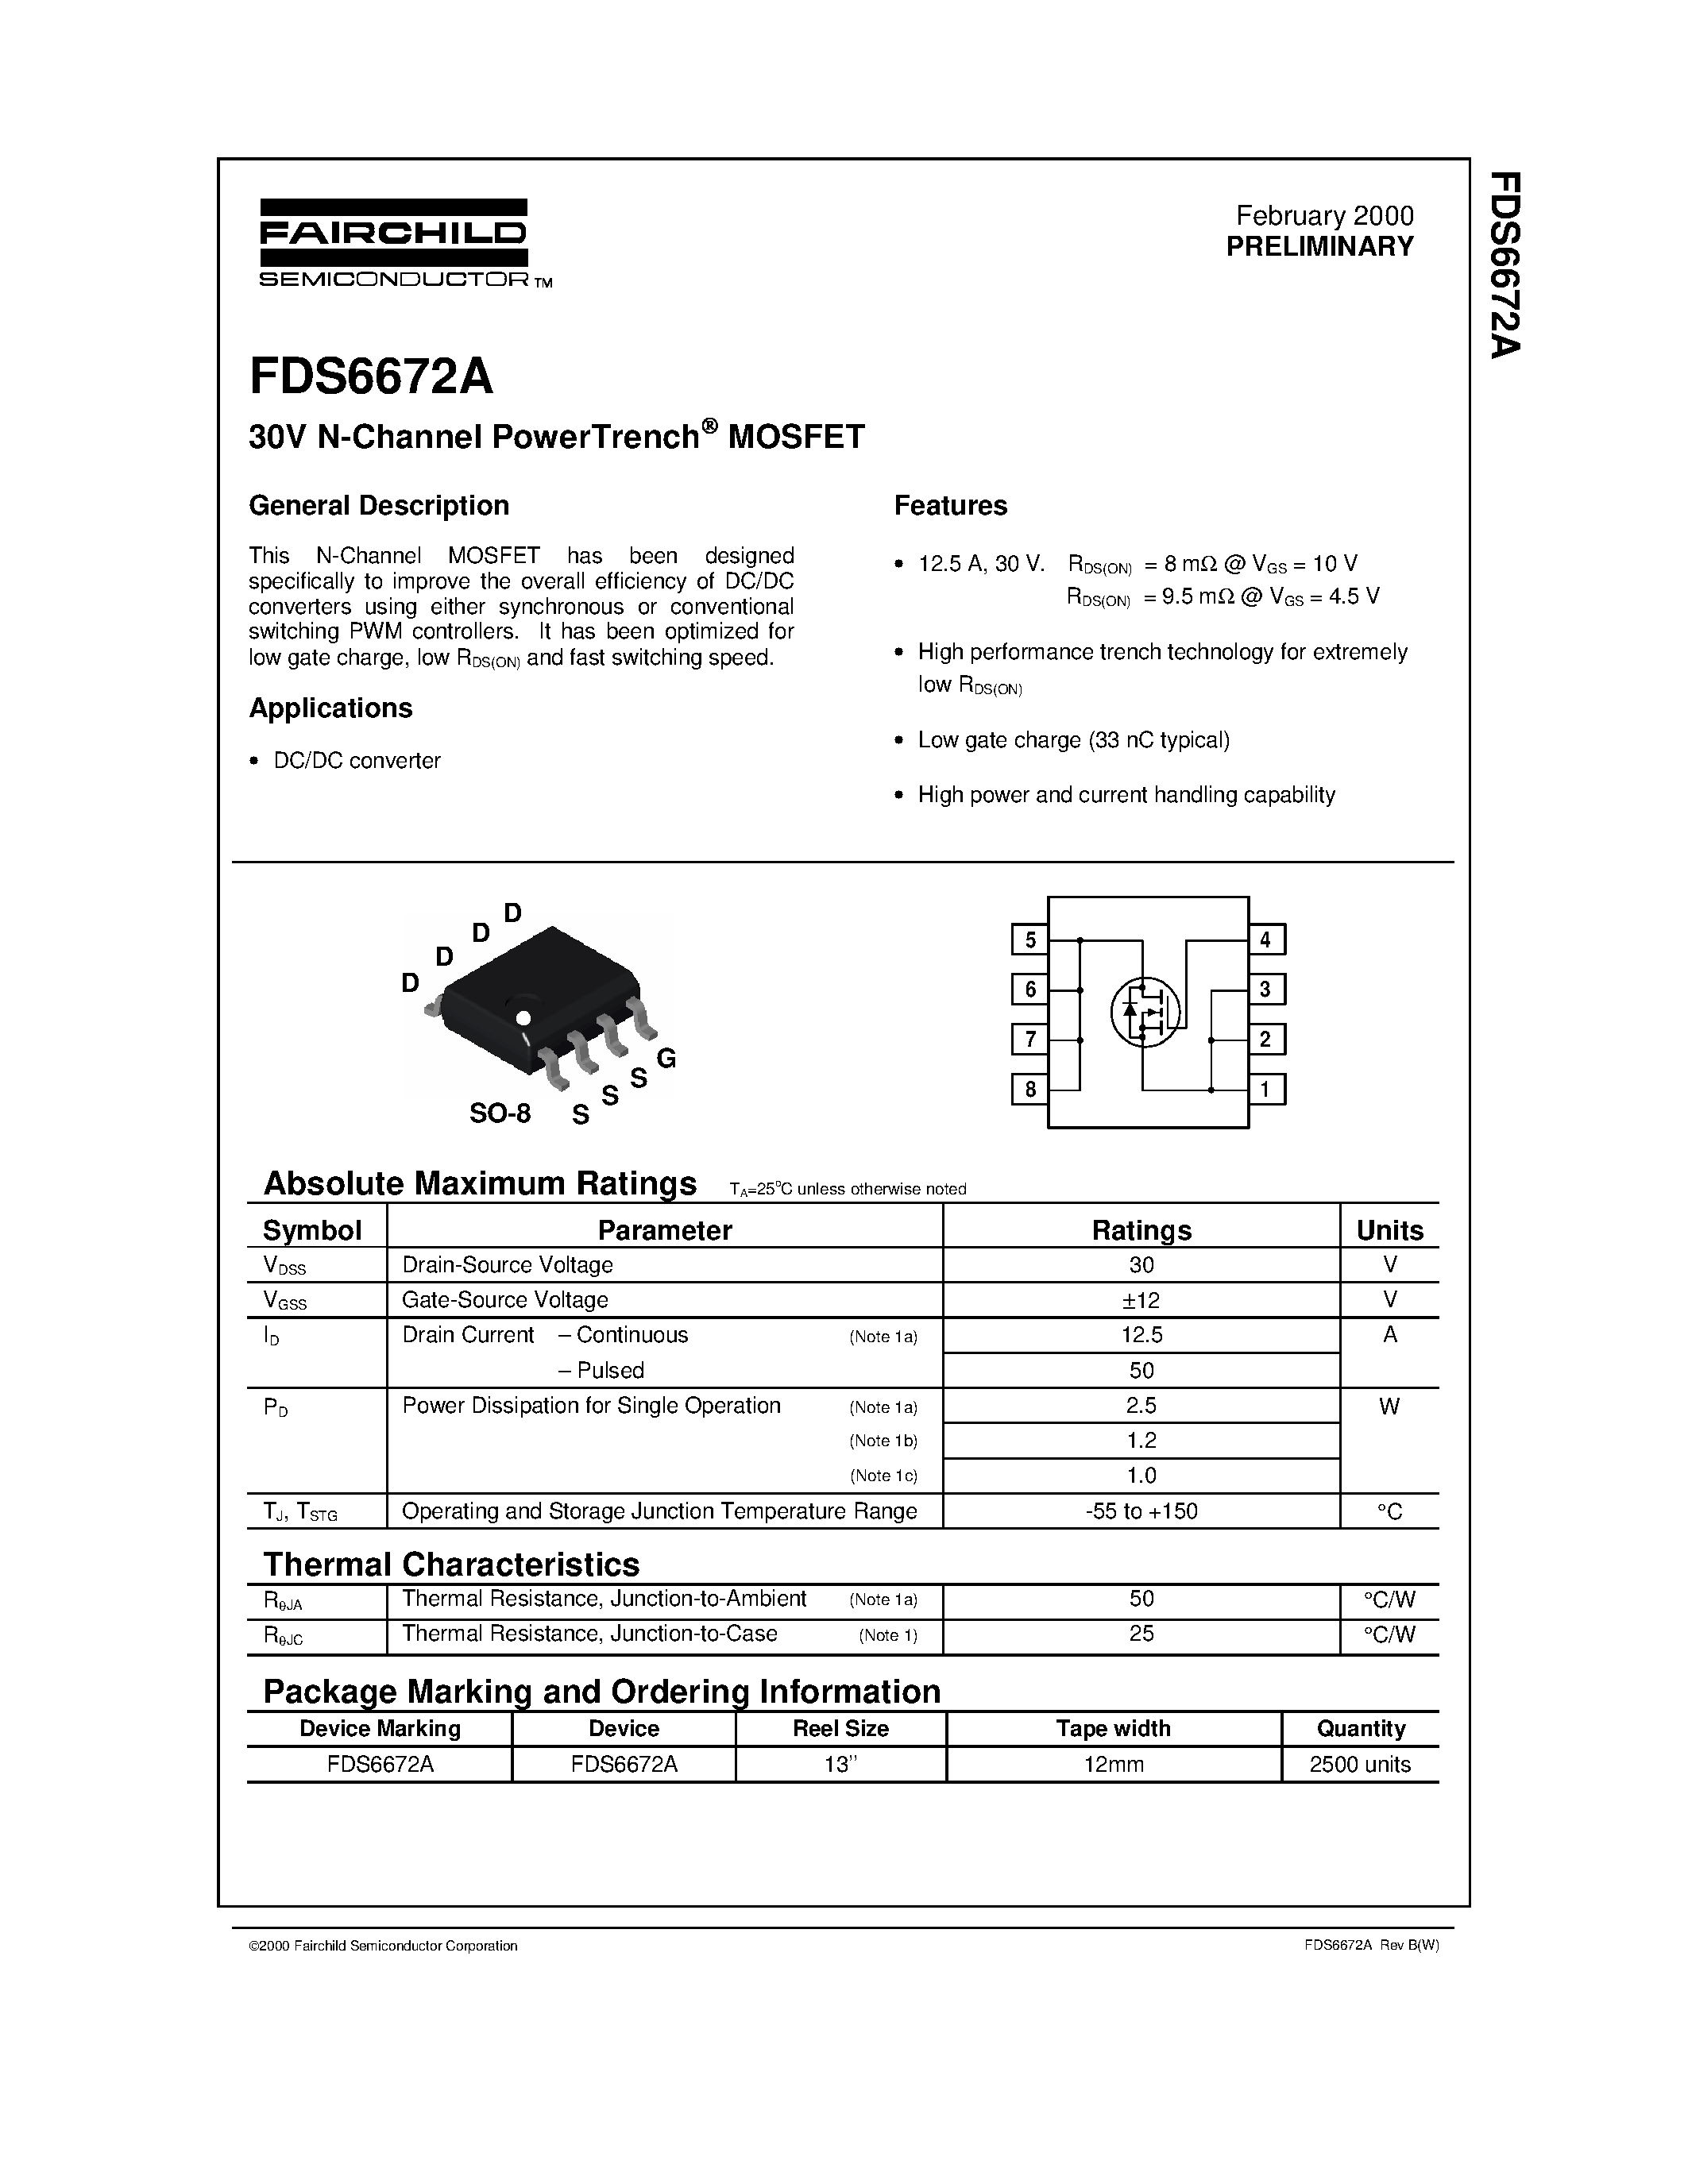 Datasheet FDS6672A - 30V N-Channel PowerTrench MOSFET page 1